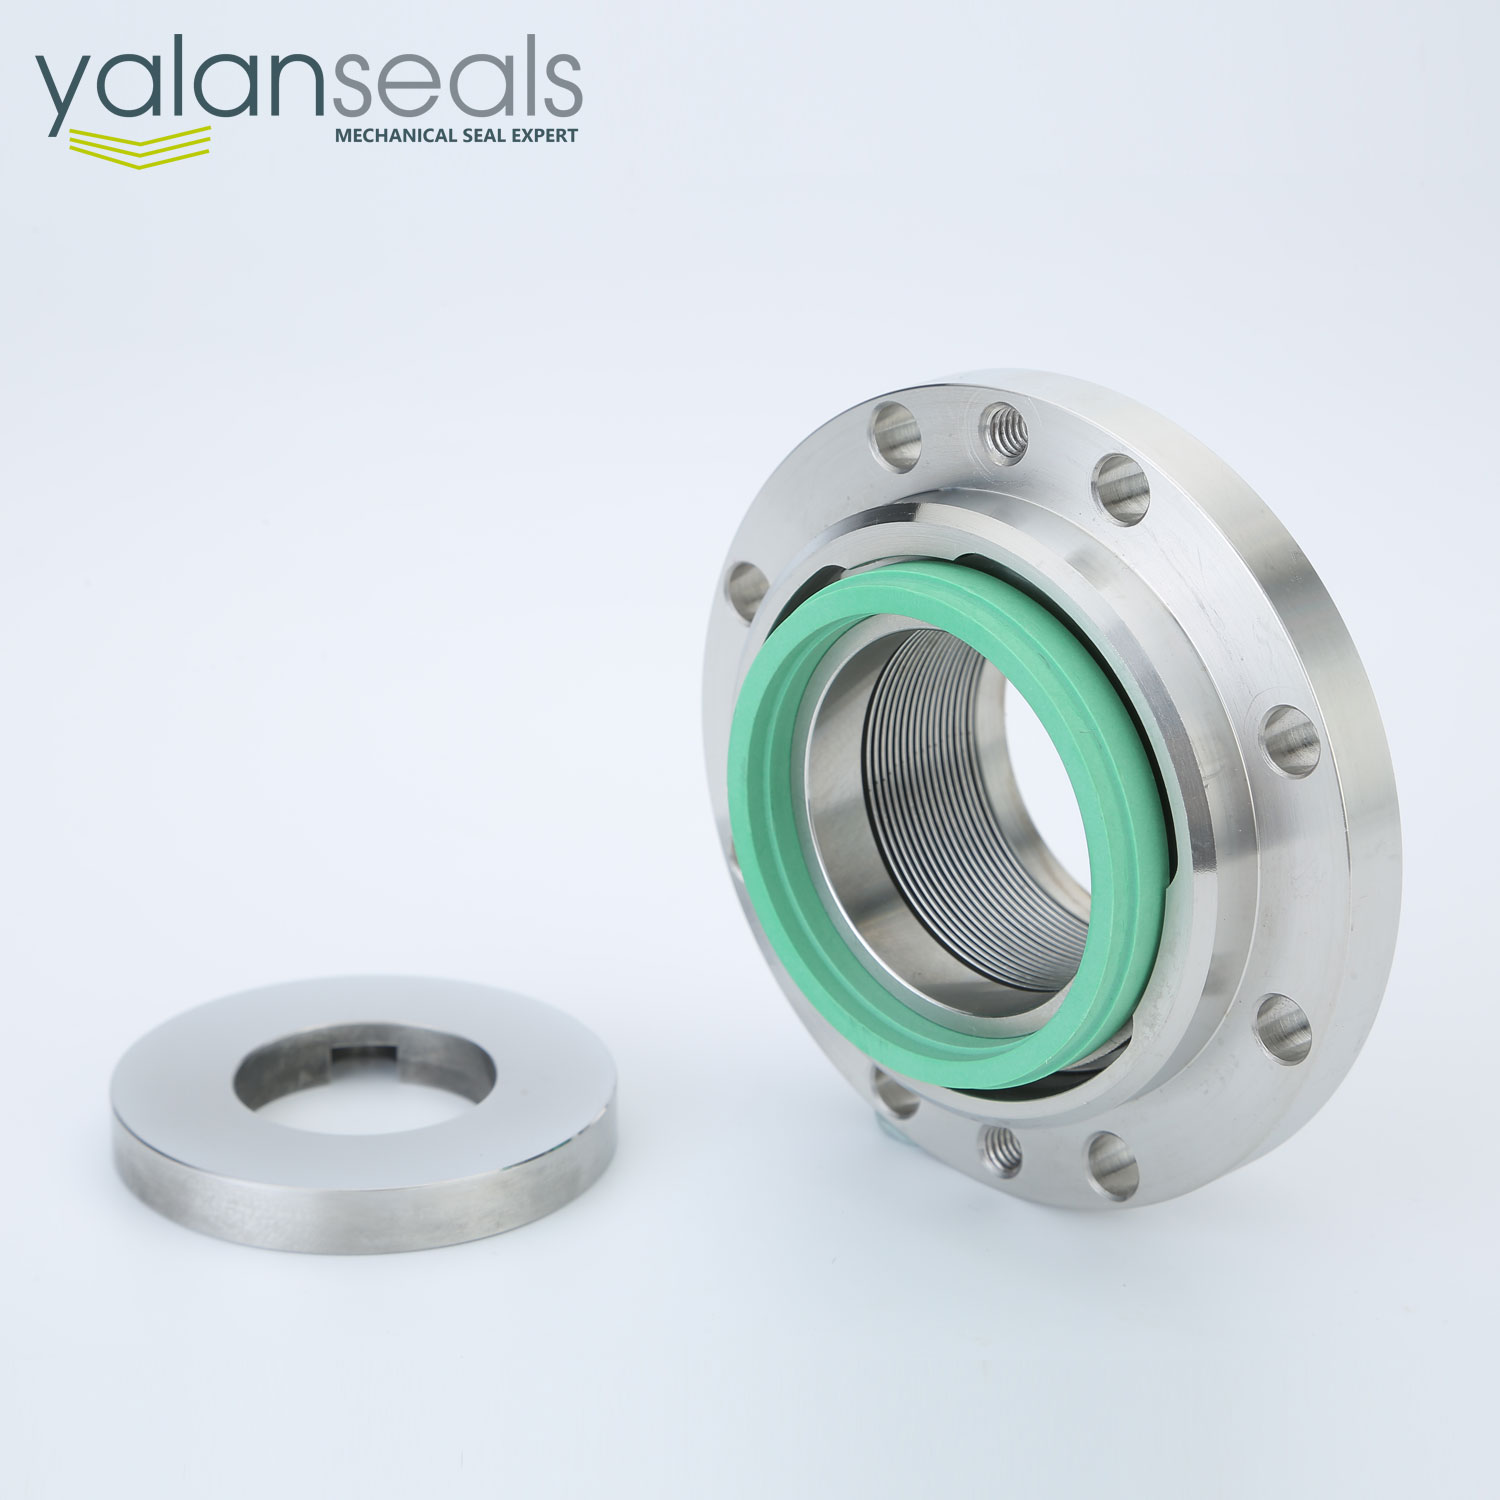 DWB2 Metal Bellow Mechanical Seal for Cryogenic Pumps